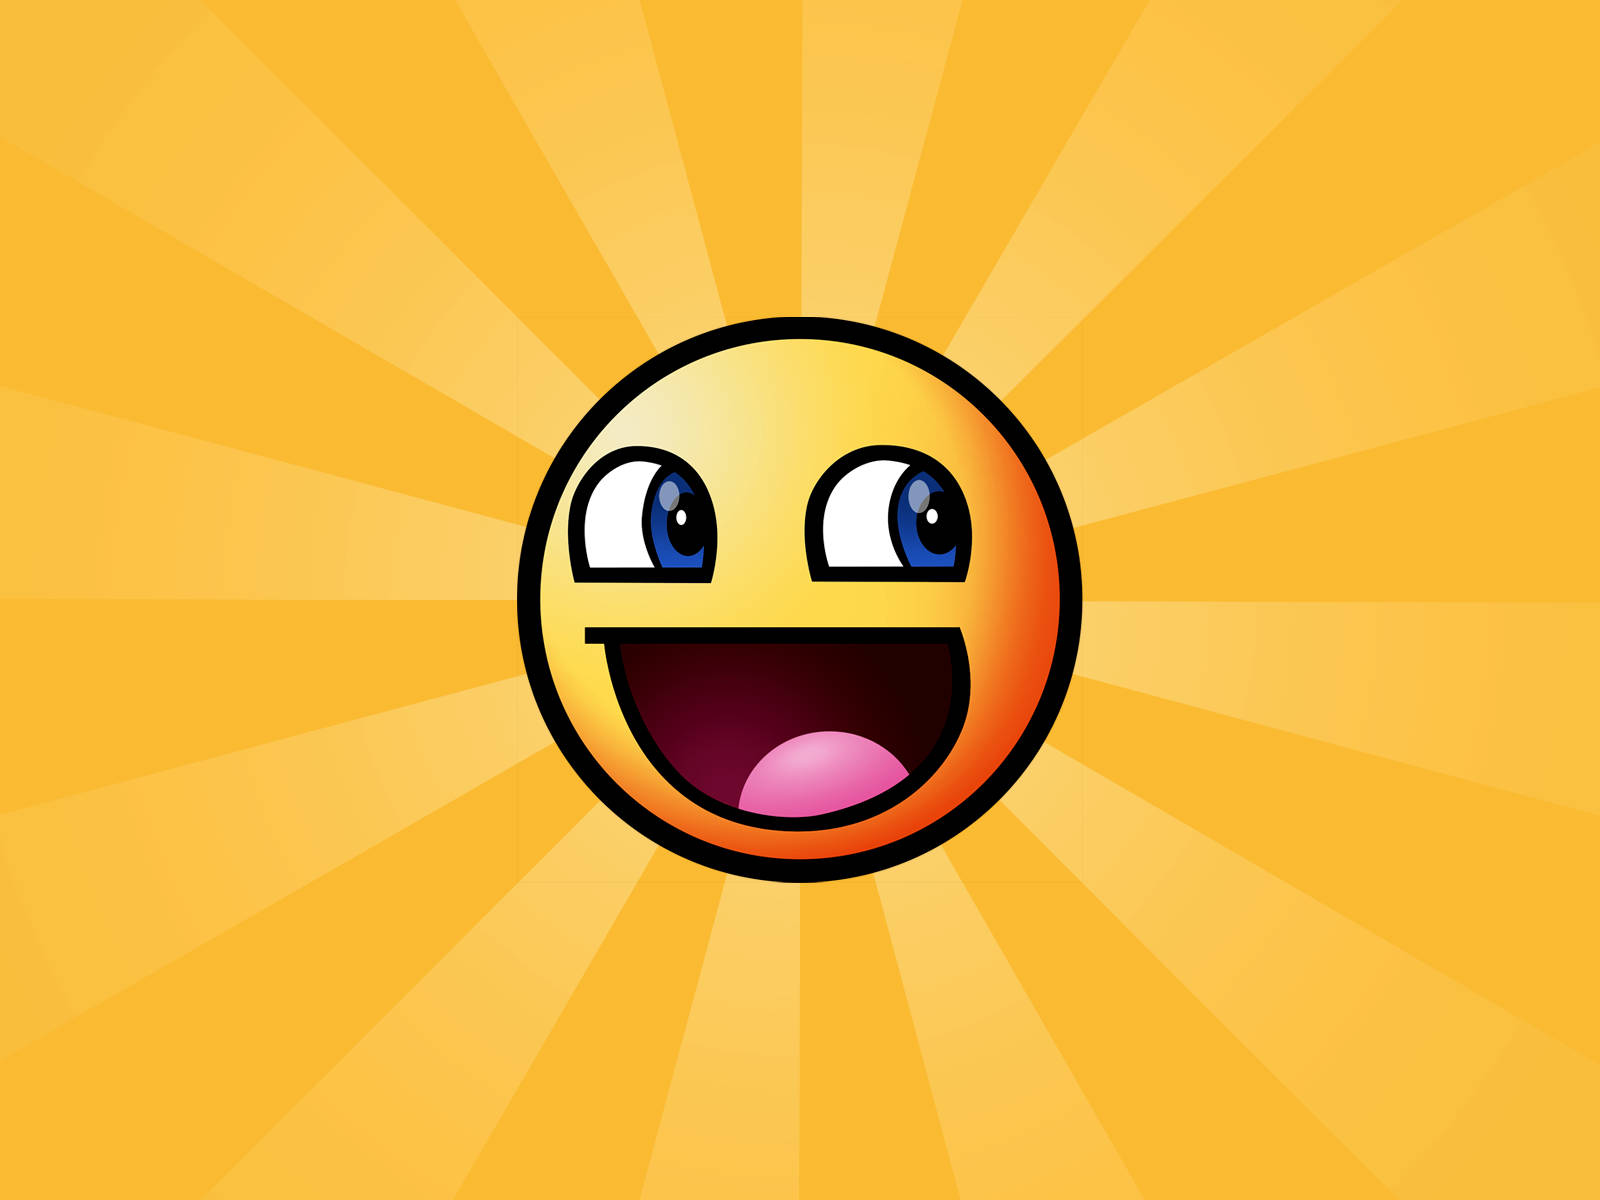 Sunny Smiley Face Background